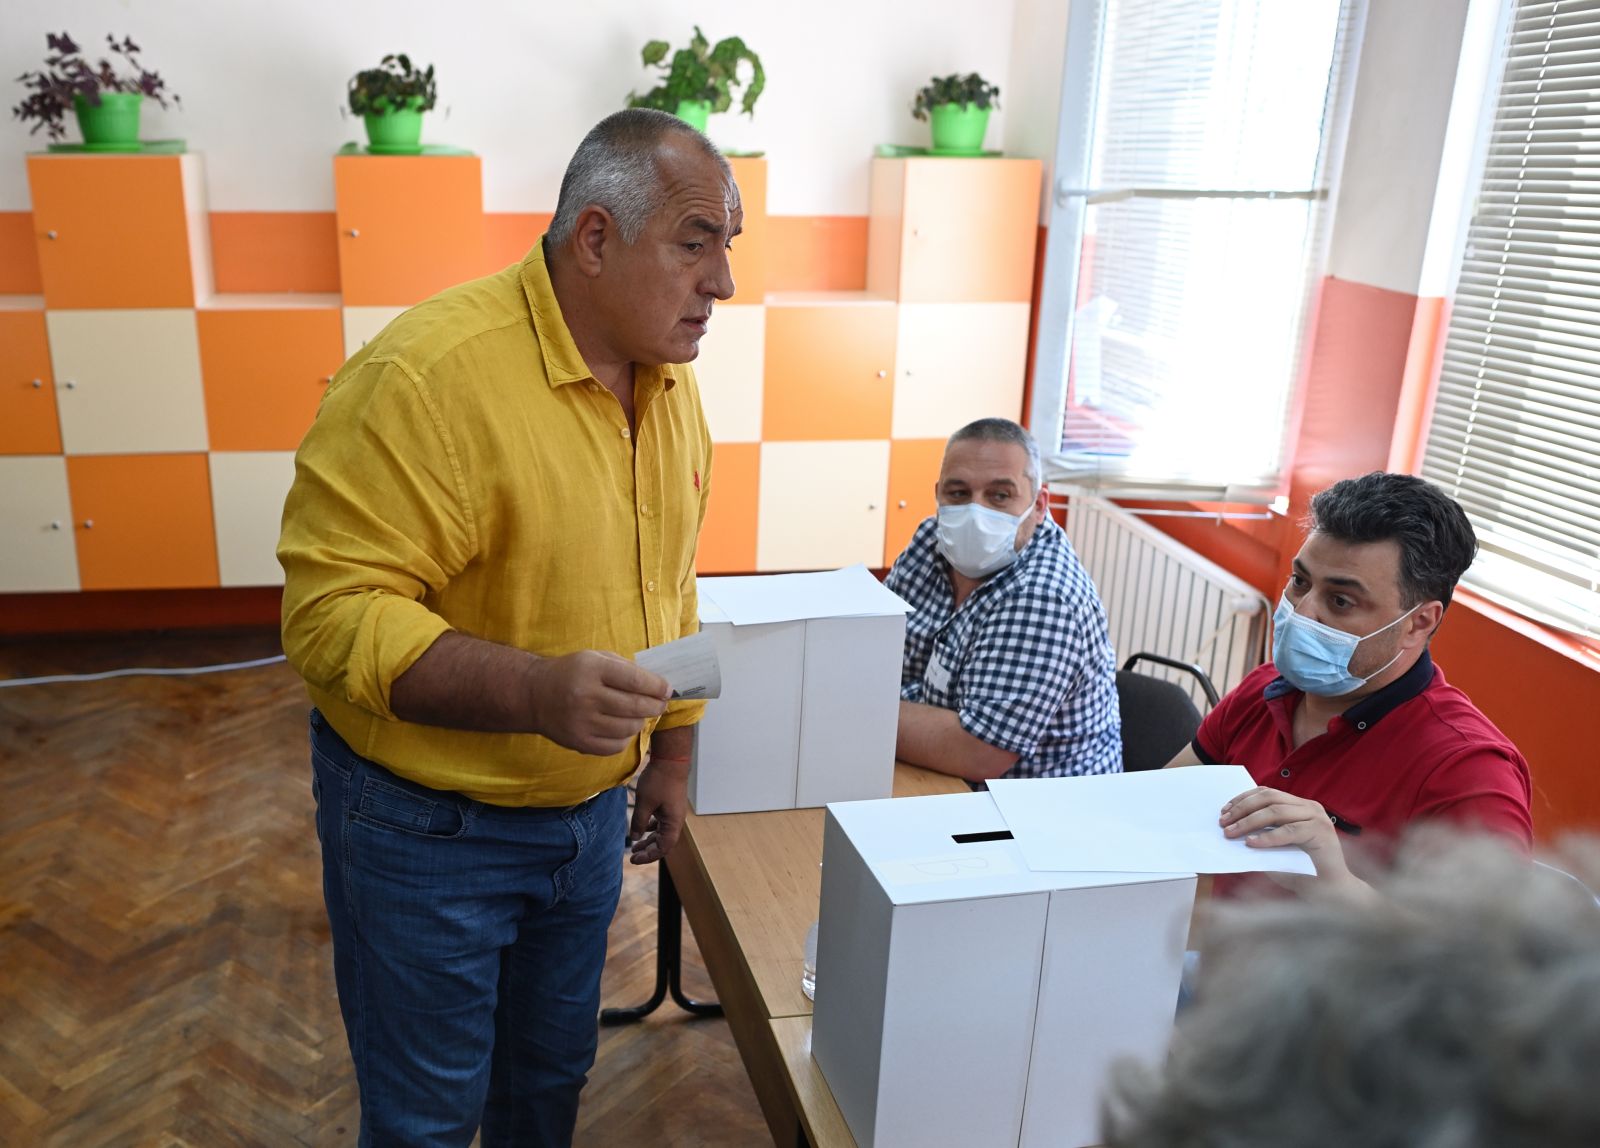 epa09336584 Bulgarian former prime minister Boyko Borissov, the leader of the GERB party, casts his vote at a polling station during the country's parliamentary elections in Sofia, Bulgaria, 11 July 2021. Until the polls close at 8:00 p.m. (5:00 p.m. GMT), voters will be able to choose between 23 parties and alliances, seven fewer than the previous 04 April legislatures, to form the new 240-seat Parliament. Victory will be contested by the conservatives of the Bulgarian Citizens for European Development (GERB), led by former Prime Minister Boyko Borissov, and by There Is Such a People, a political party recently founded by singer and television host Slavi Trifonov.  EPA/VASSIL DONEV